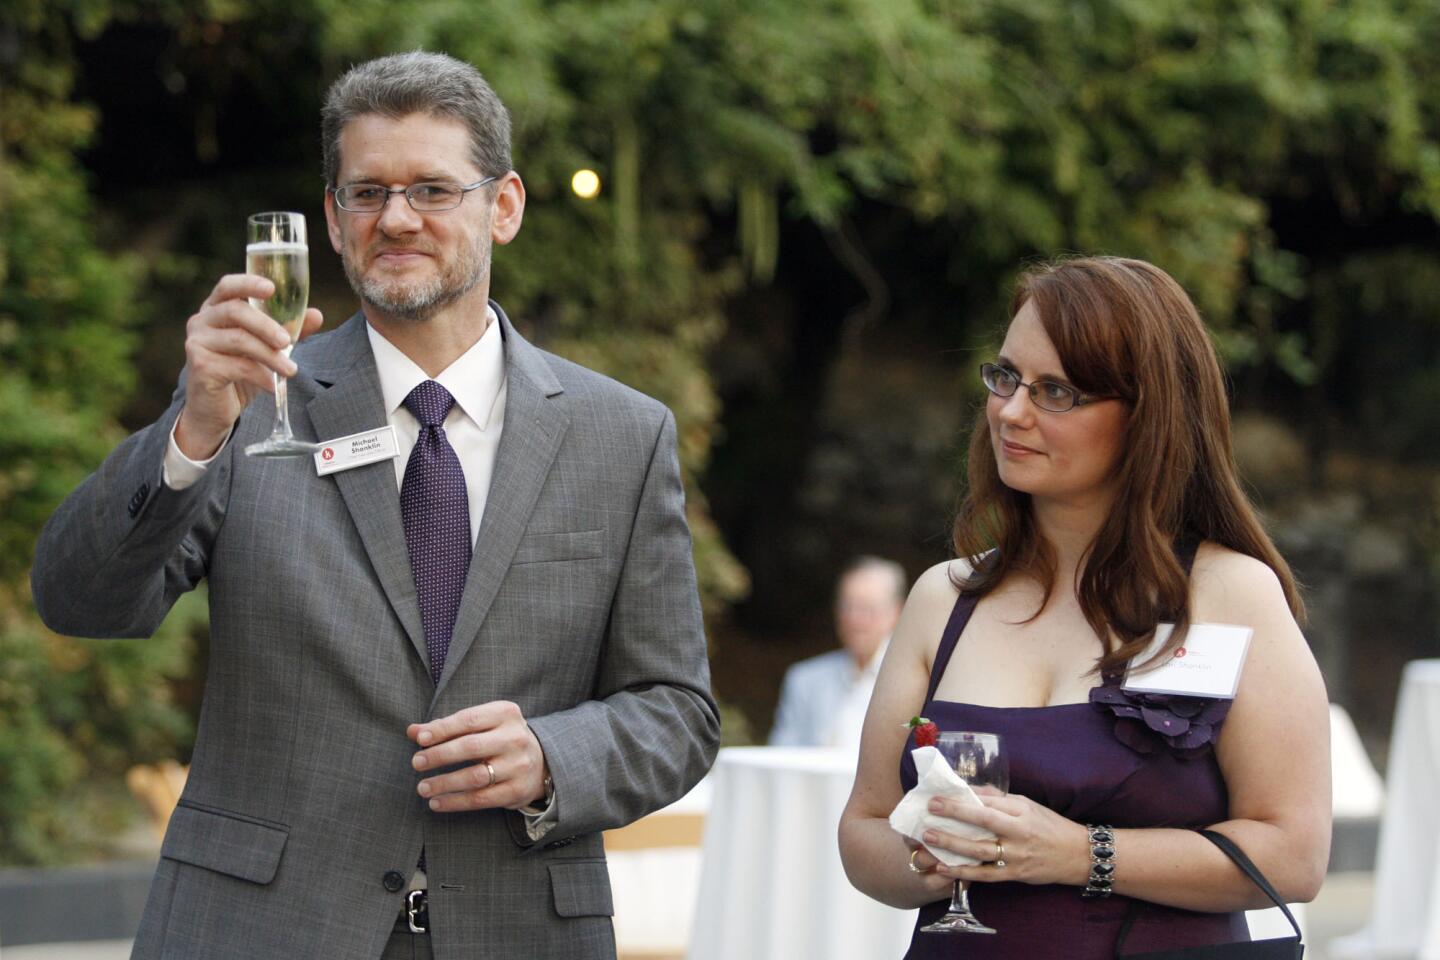 The new Chief Executive Officer for Kidspace Children's Museum, Michael Shanklin, left, and his wife, Lori, make a toast during his reception, which took place in Pasadena on Wednesday, September 14, 2011.